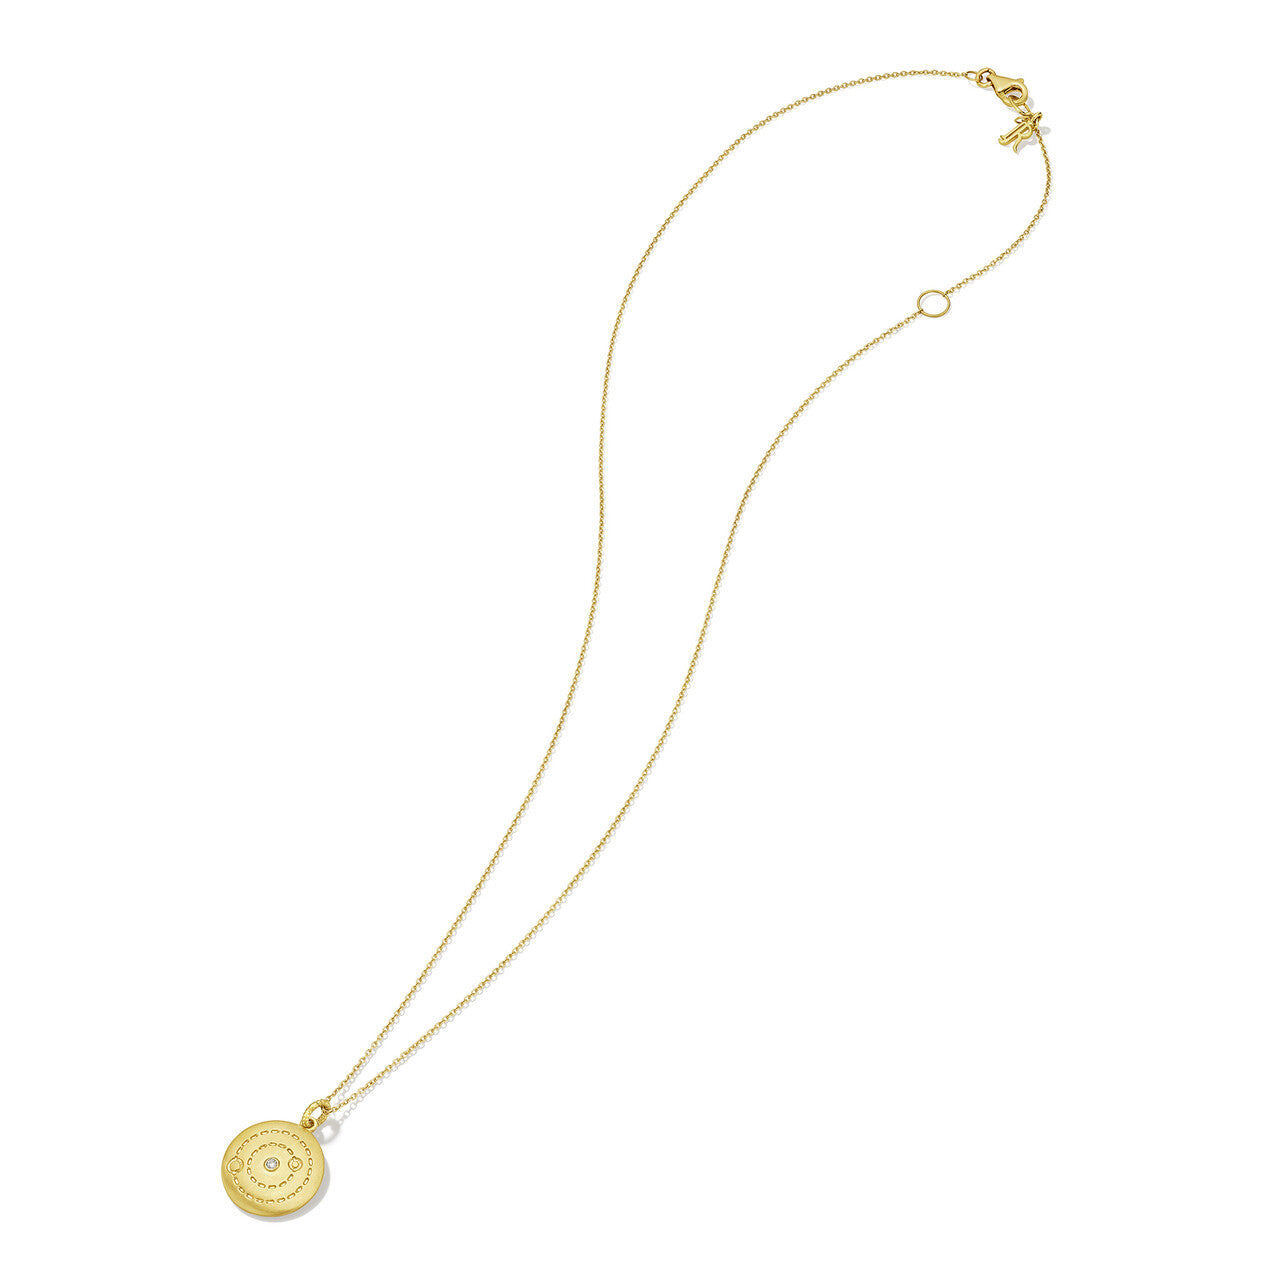 Little Luxuries Cosmic Medallion Necklace with Diamonds in 14K